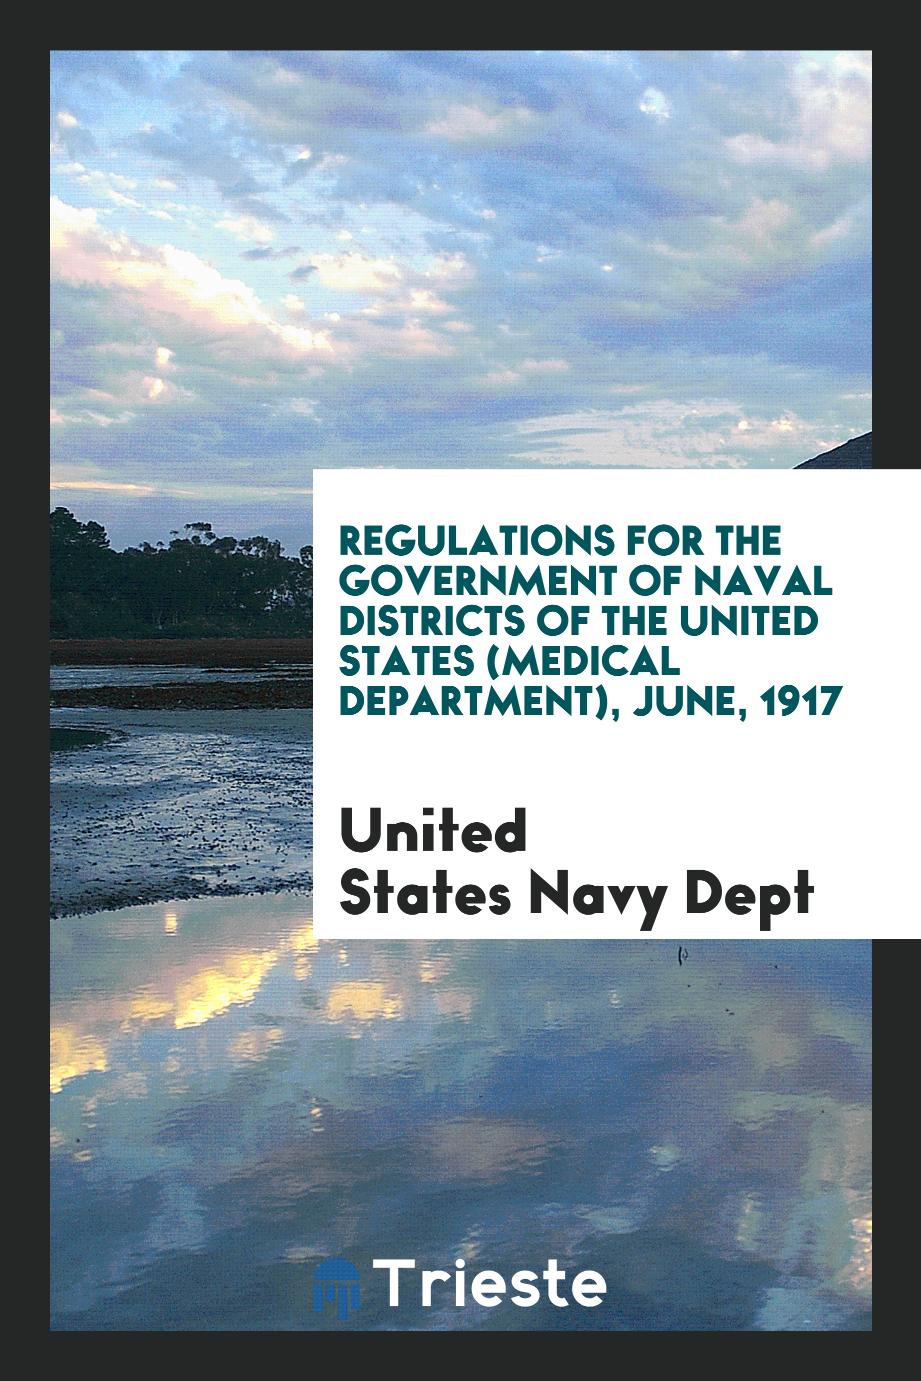 Regulations for the Government of Naval Districts of the United States (Medical Department), June, 1917